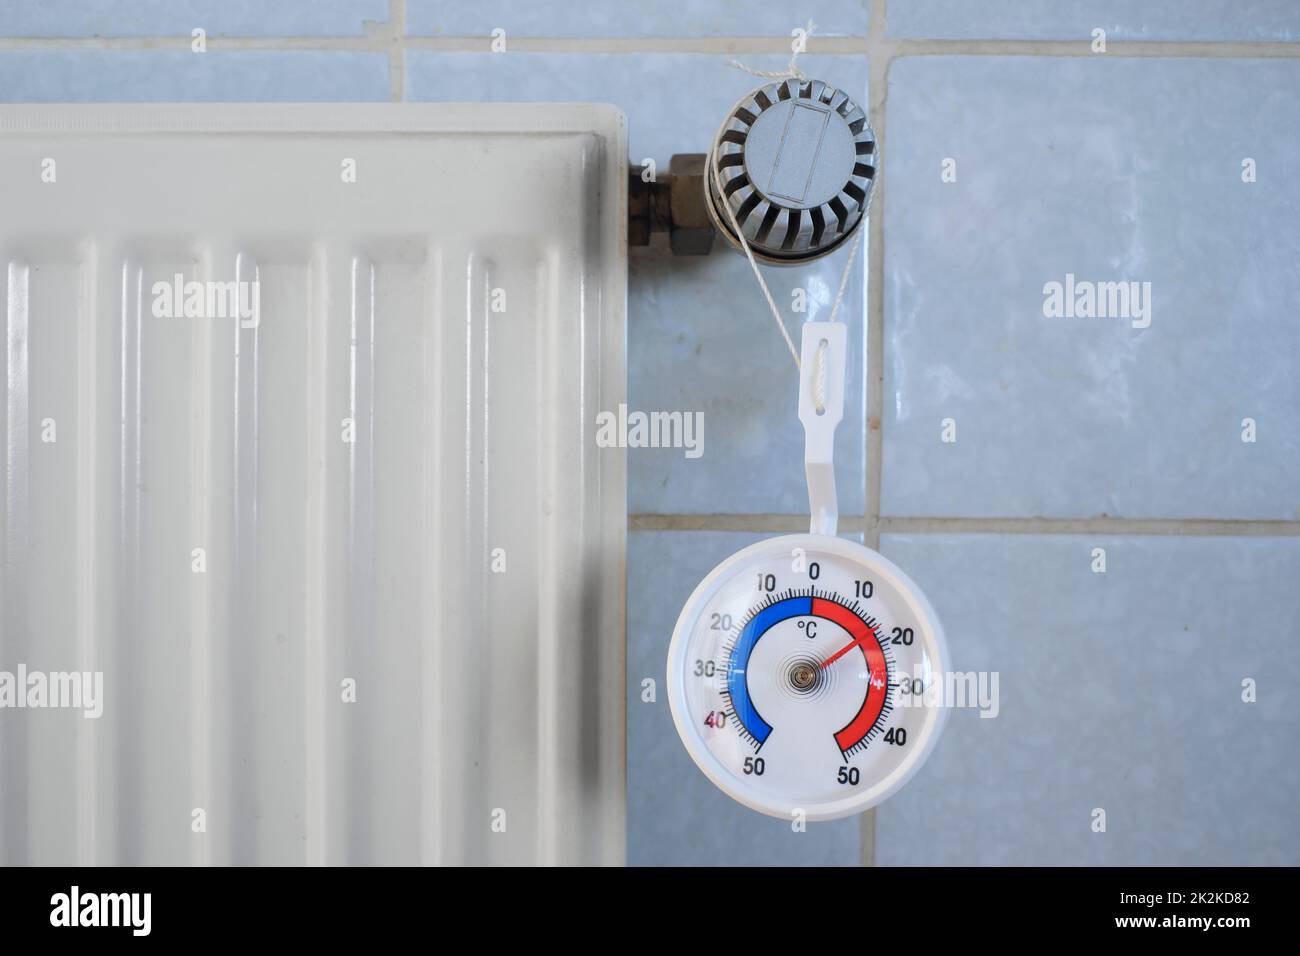 Radiator,valve and thermometer showing low temperature, shortage of heating gas and oil due to the embargo of russian oil and gas in europe Stock Photo